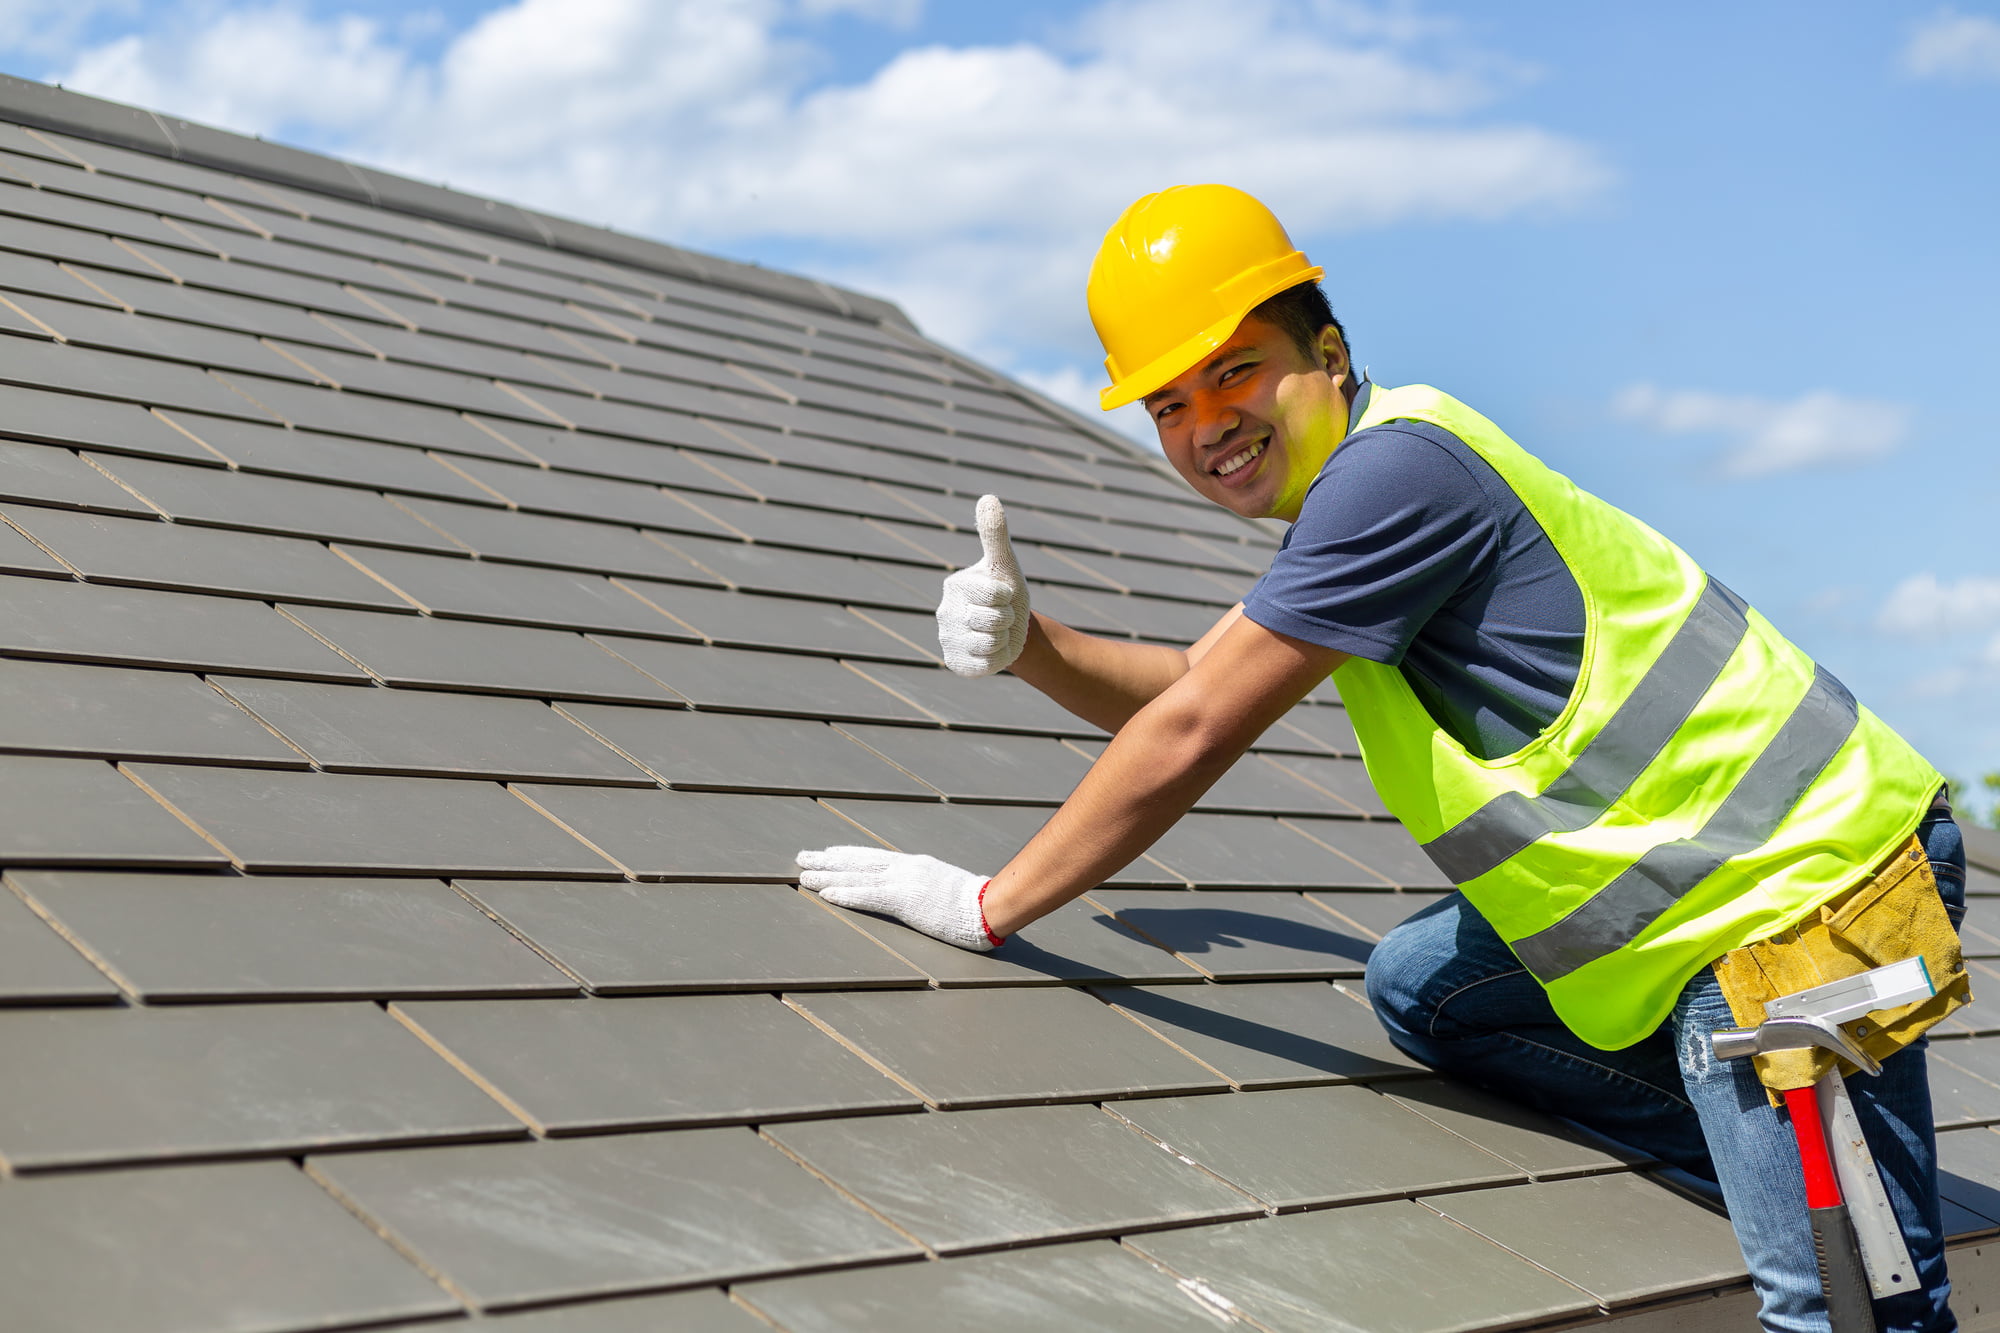 It is important to hire a reliable roofing company to service your home. This is how to find the best roofers in your area.